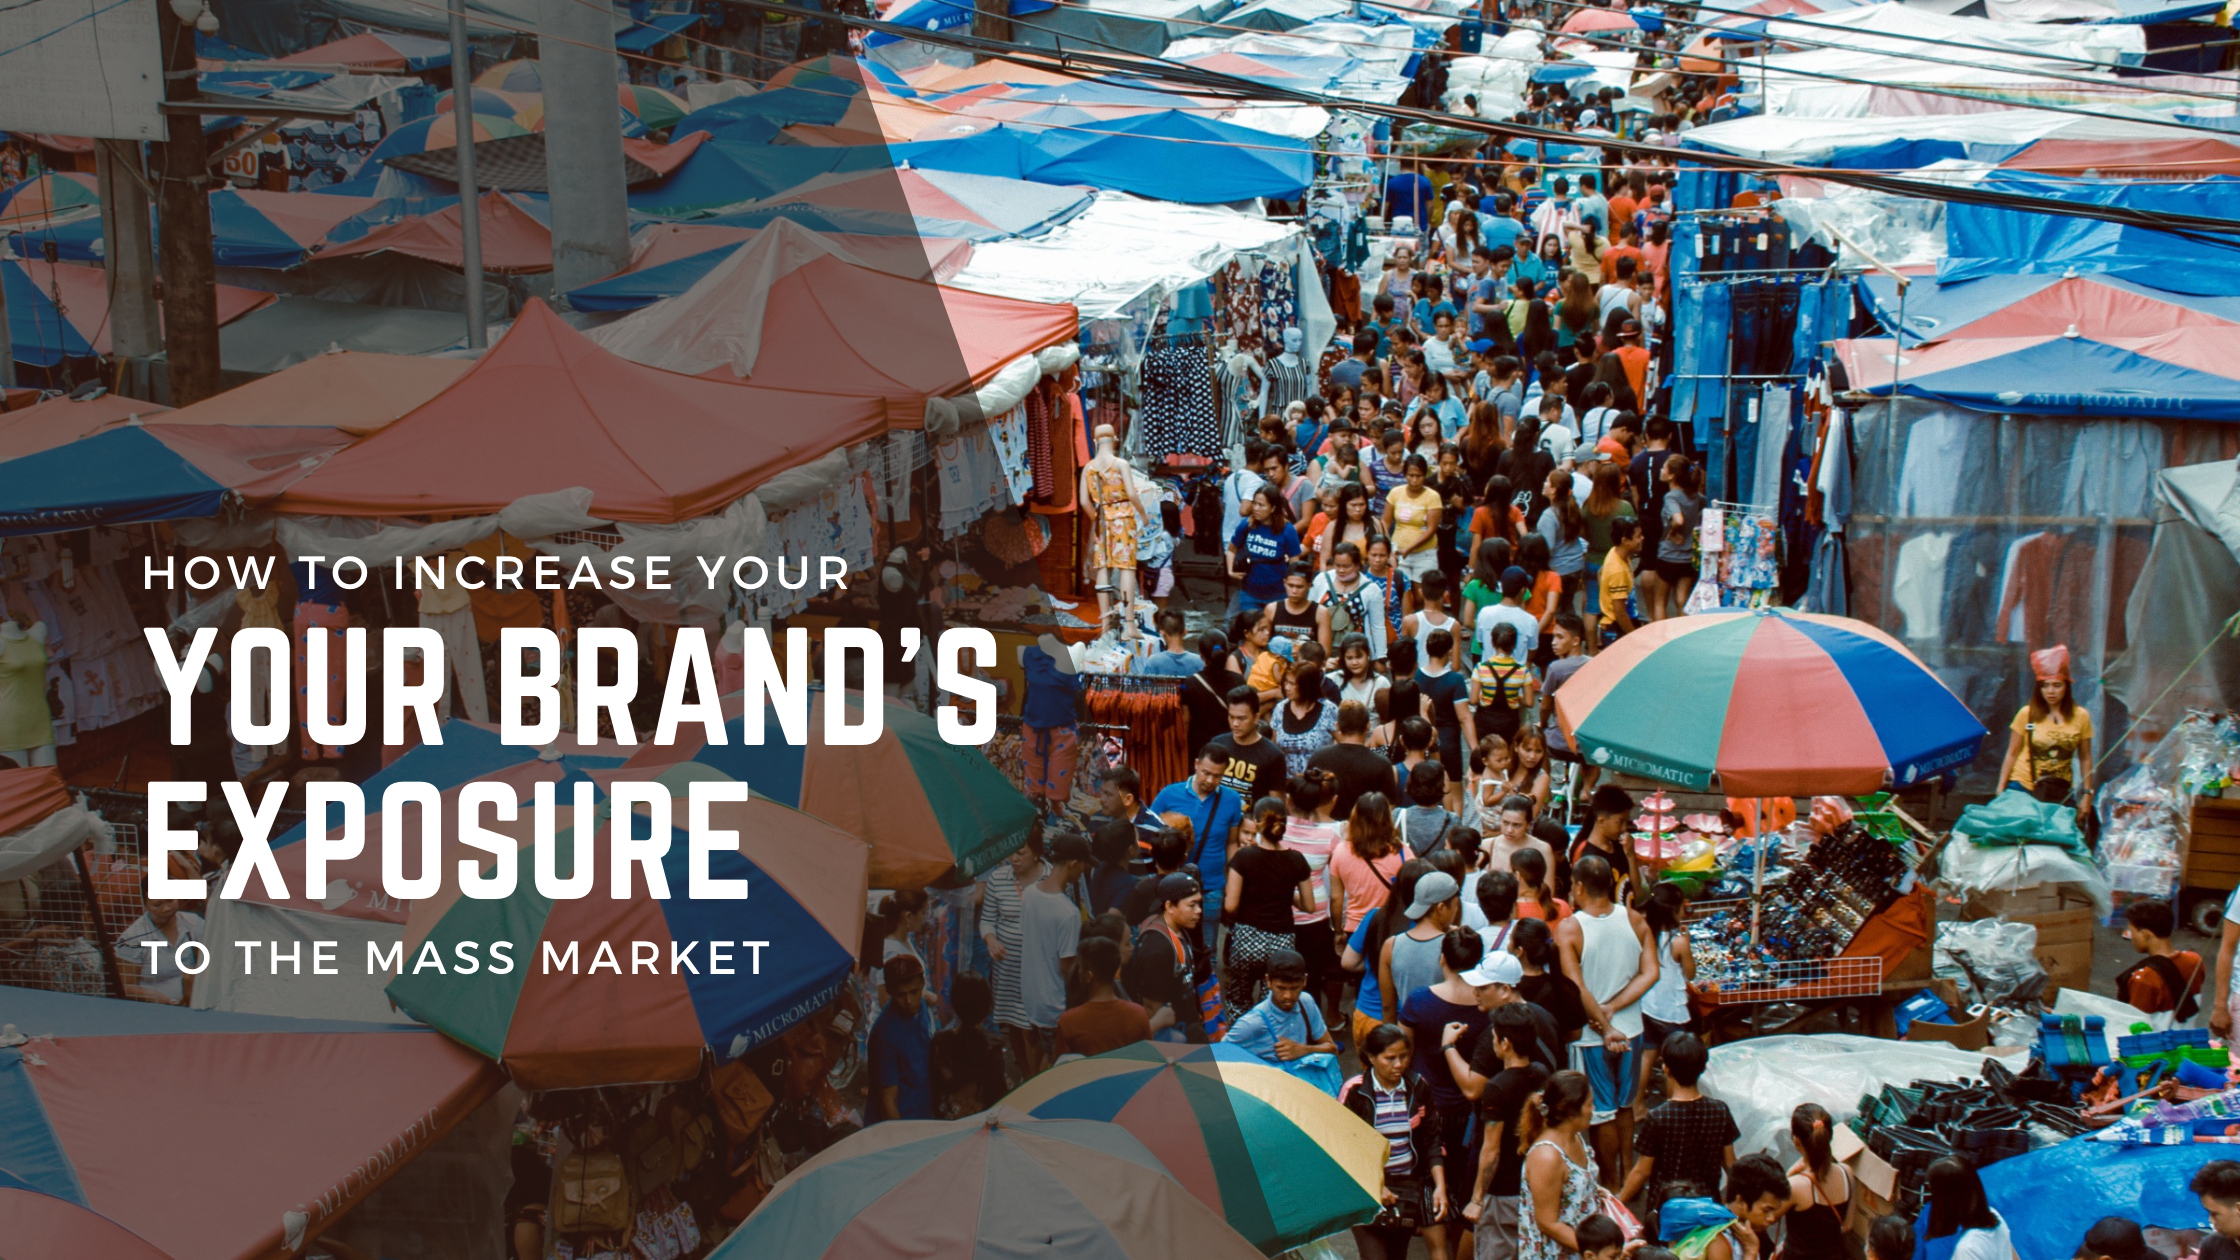 How to Increase Your Brand’s Exposure to the Mass Market